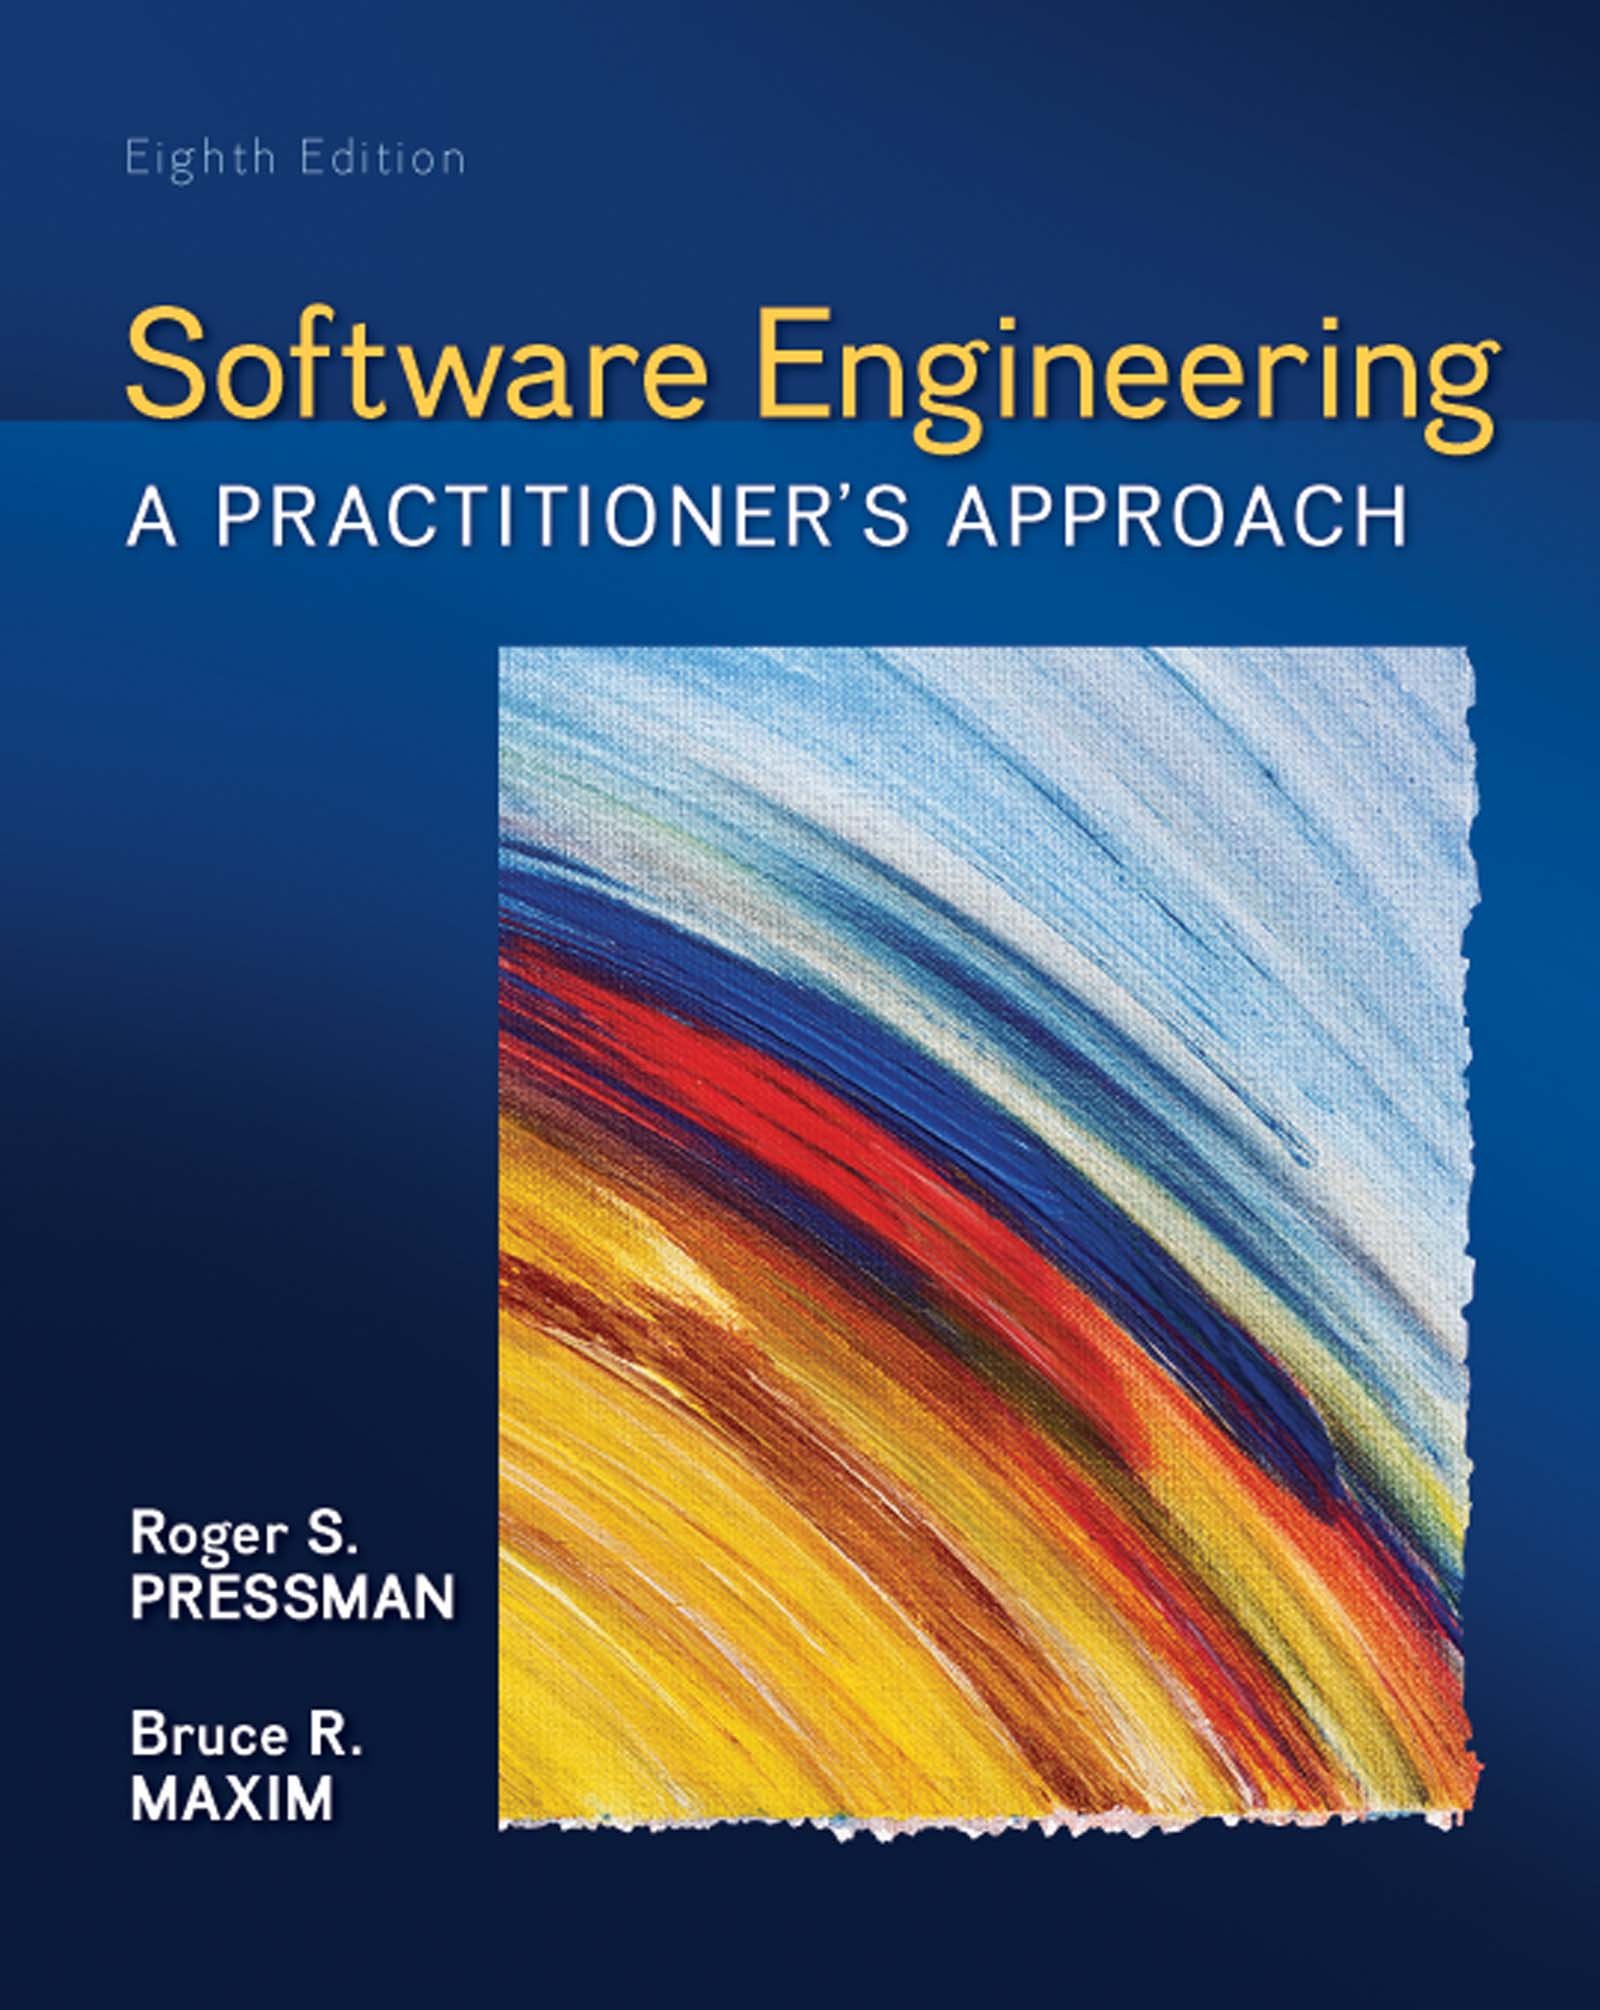 software-engineering-a-practitioners-approach-8th-edition-author-pressman-author-publisher-sem2021-06-26-035425.jpg